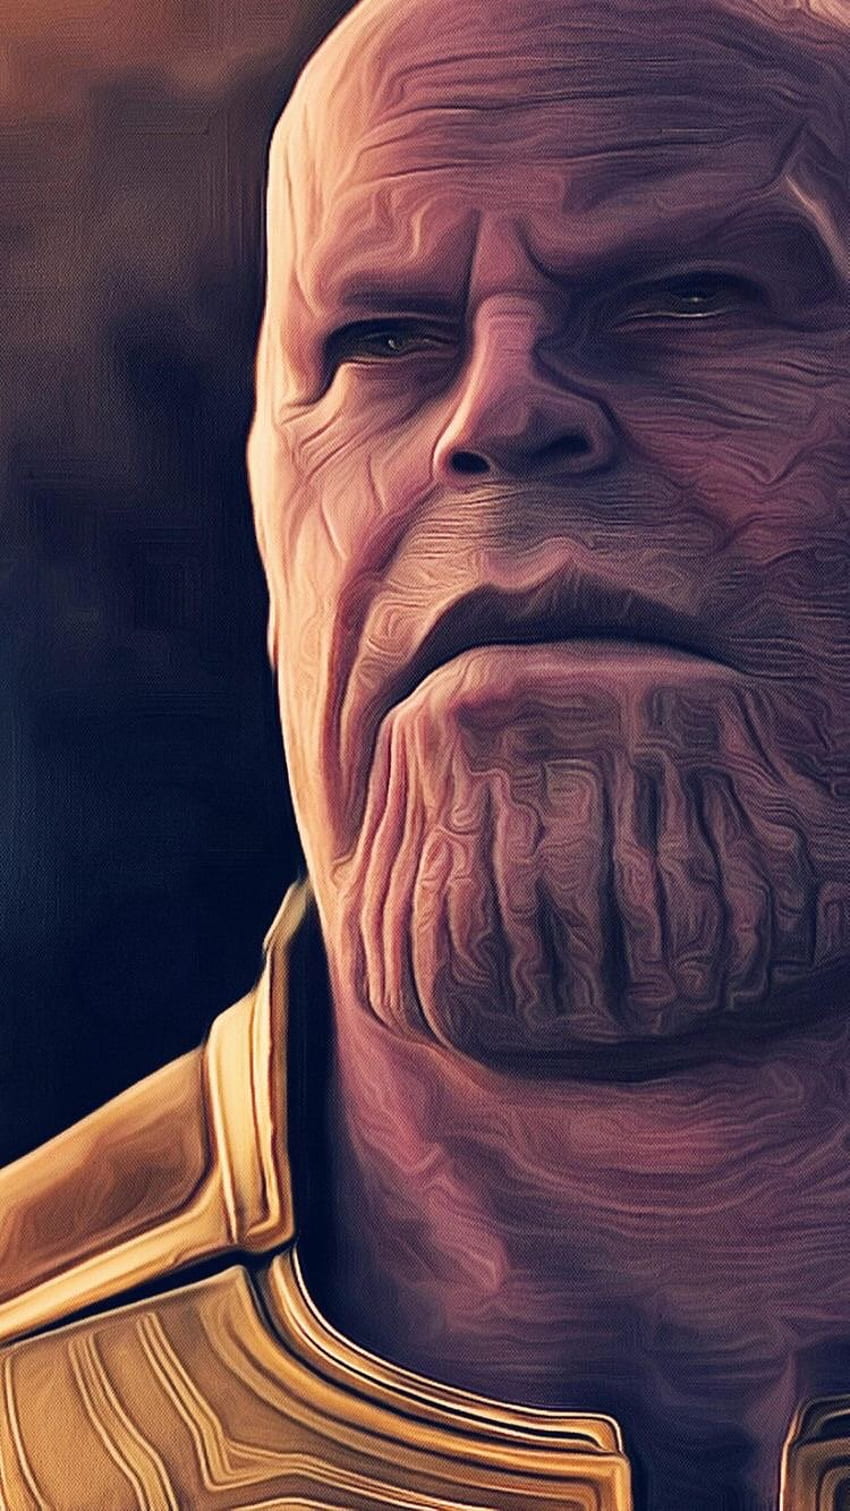 200+] Thanos Wallpapers | Wallpapers.com